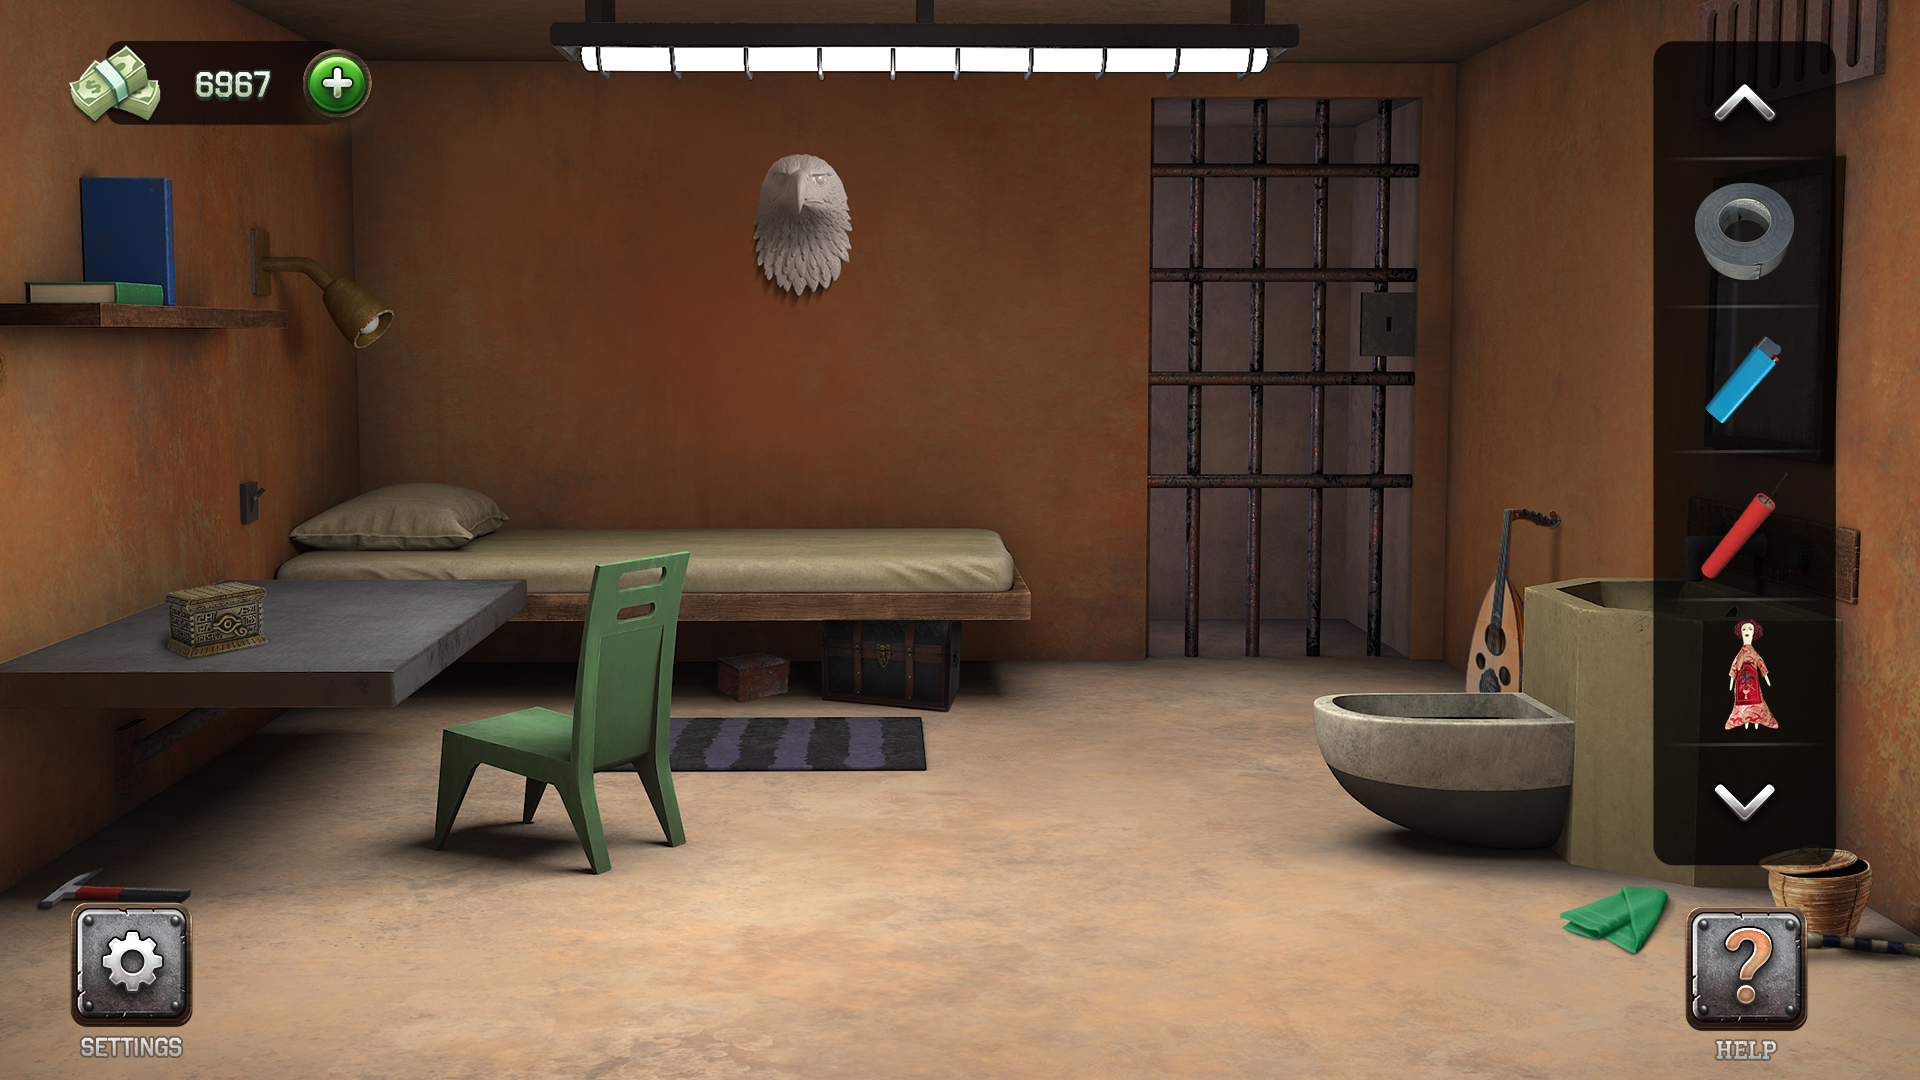 100 Doors - Escape from Prison - Android game screenshots.